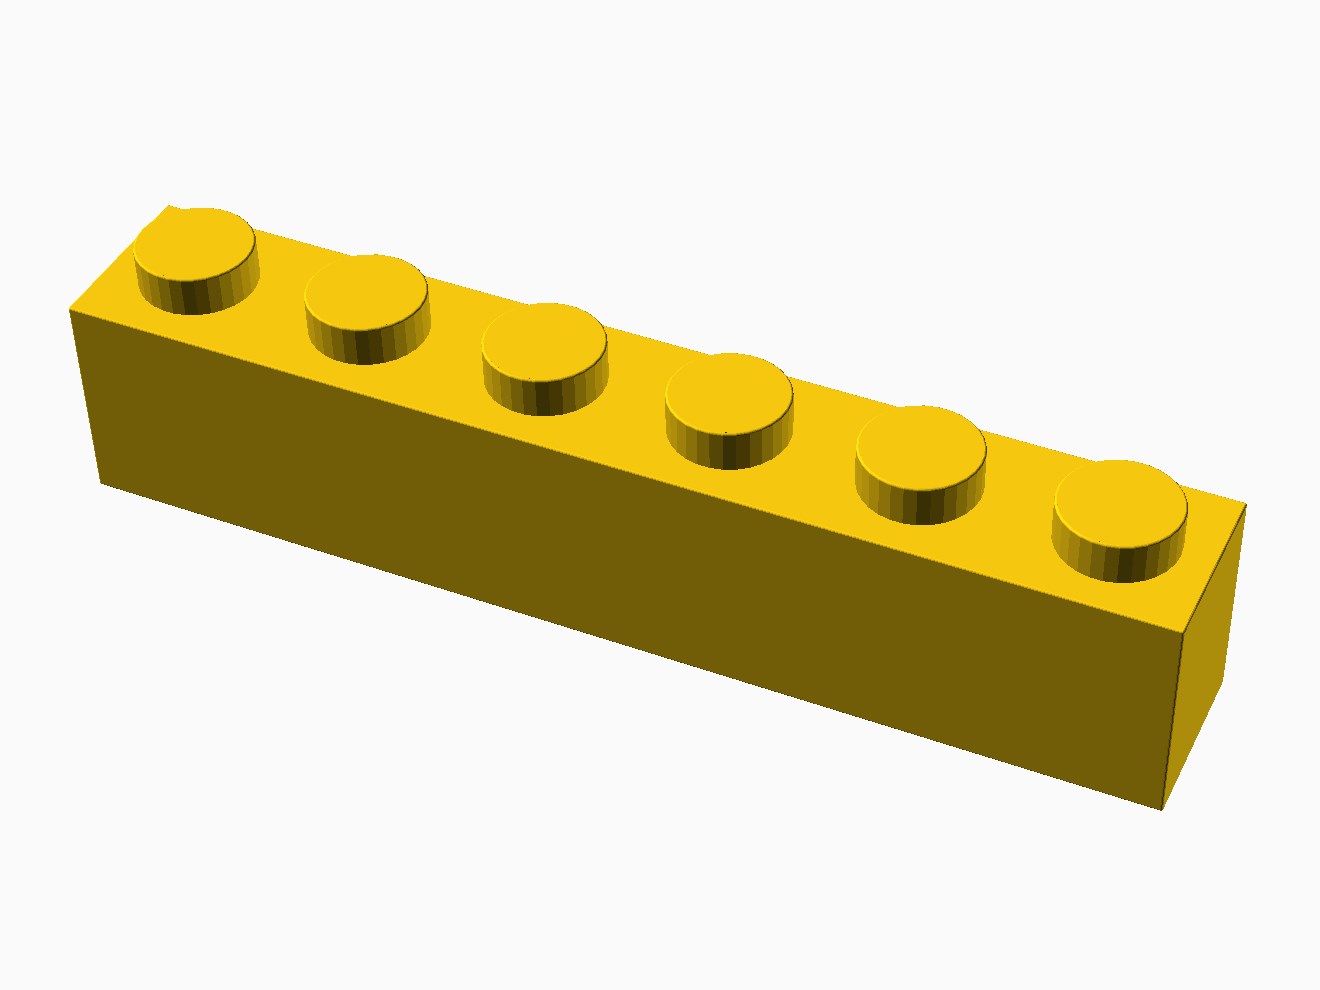 3D printable model of a LEGO 6x1 Brick with standard knobs.